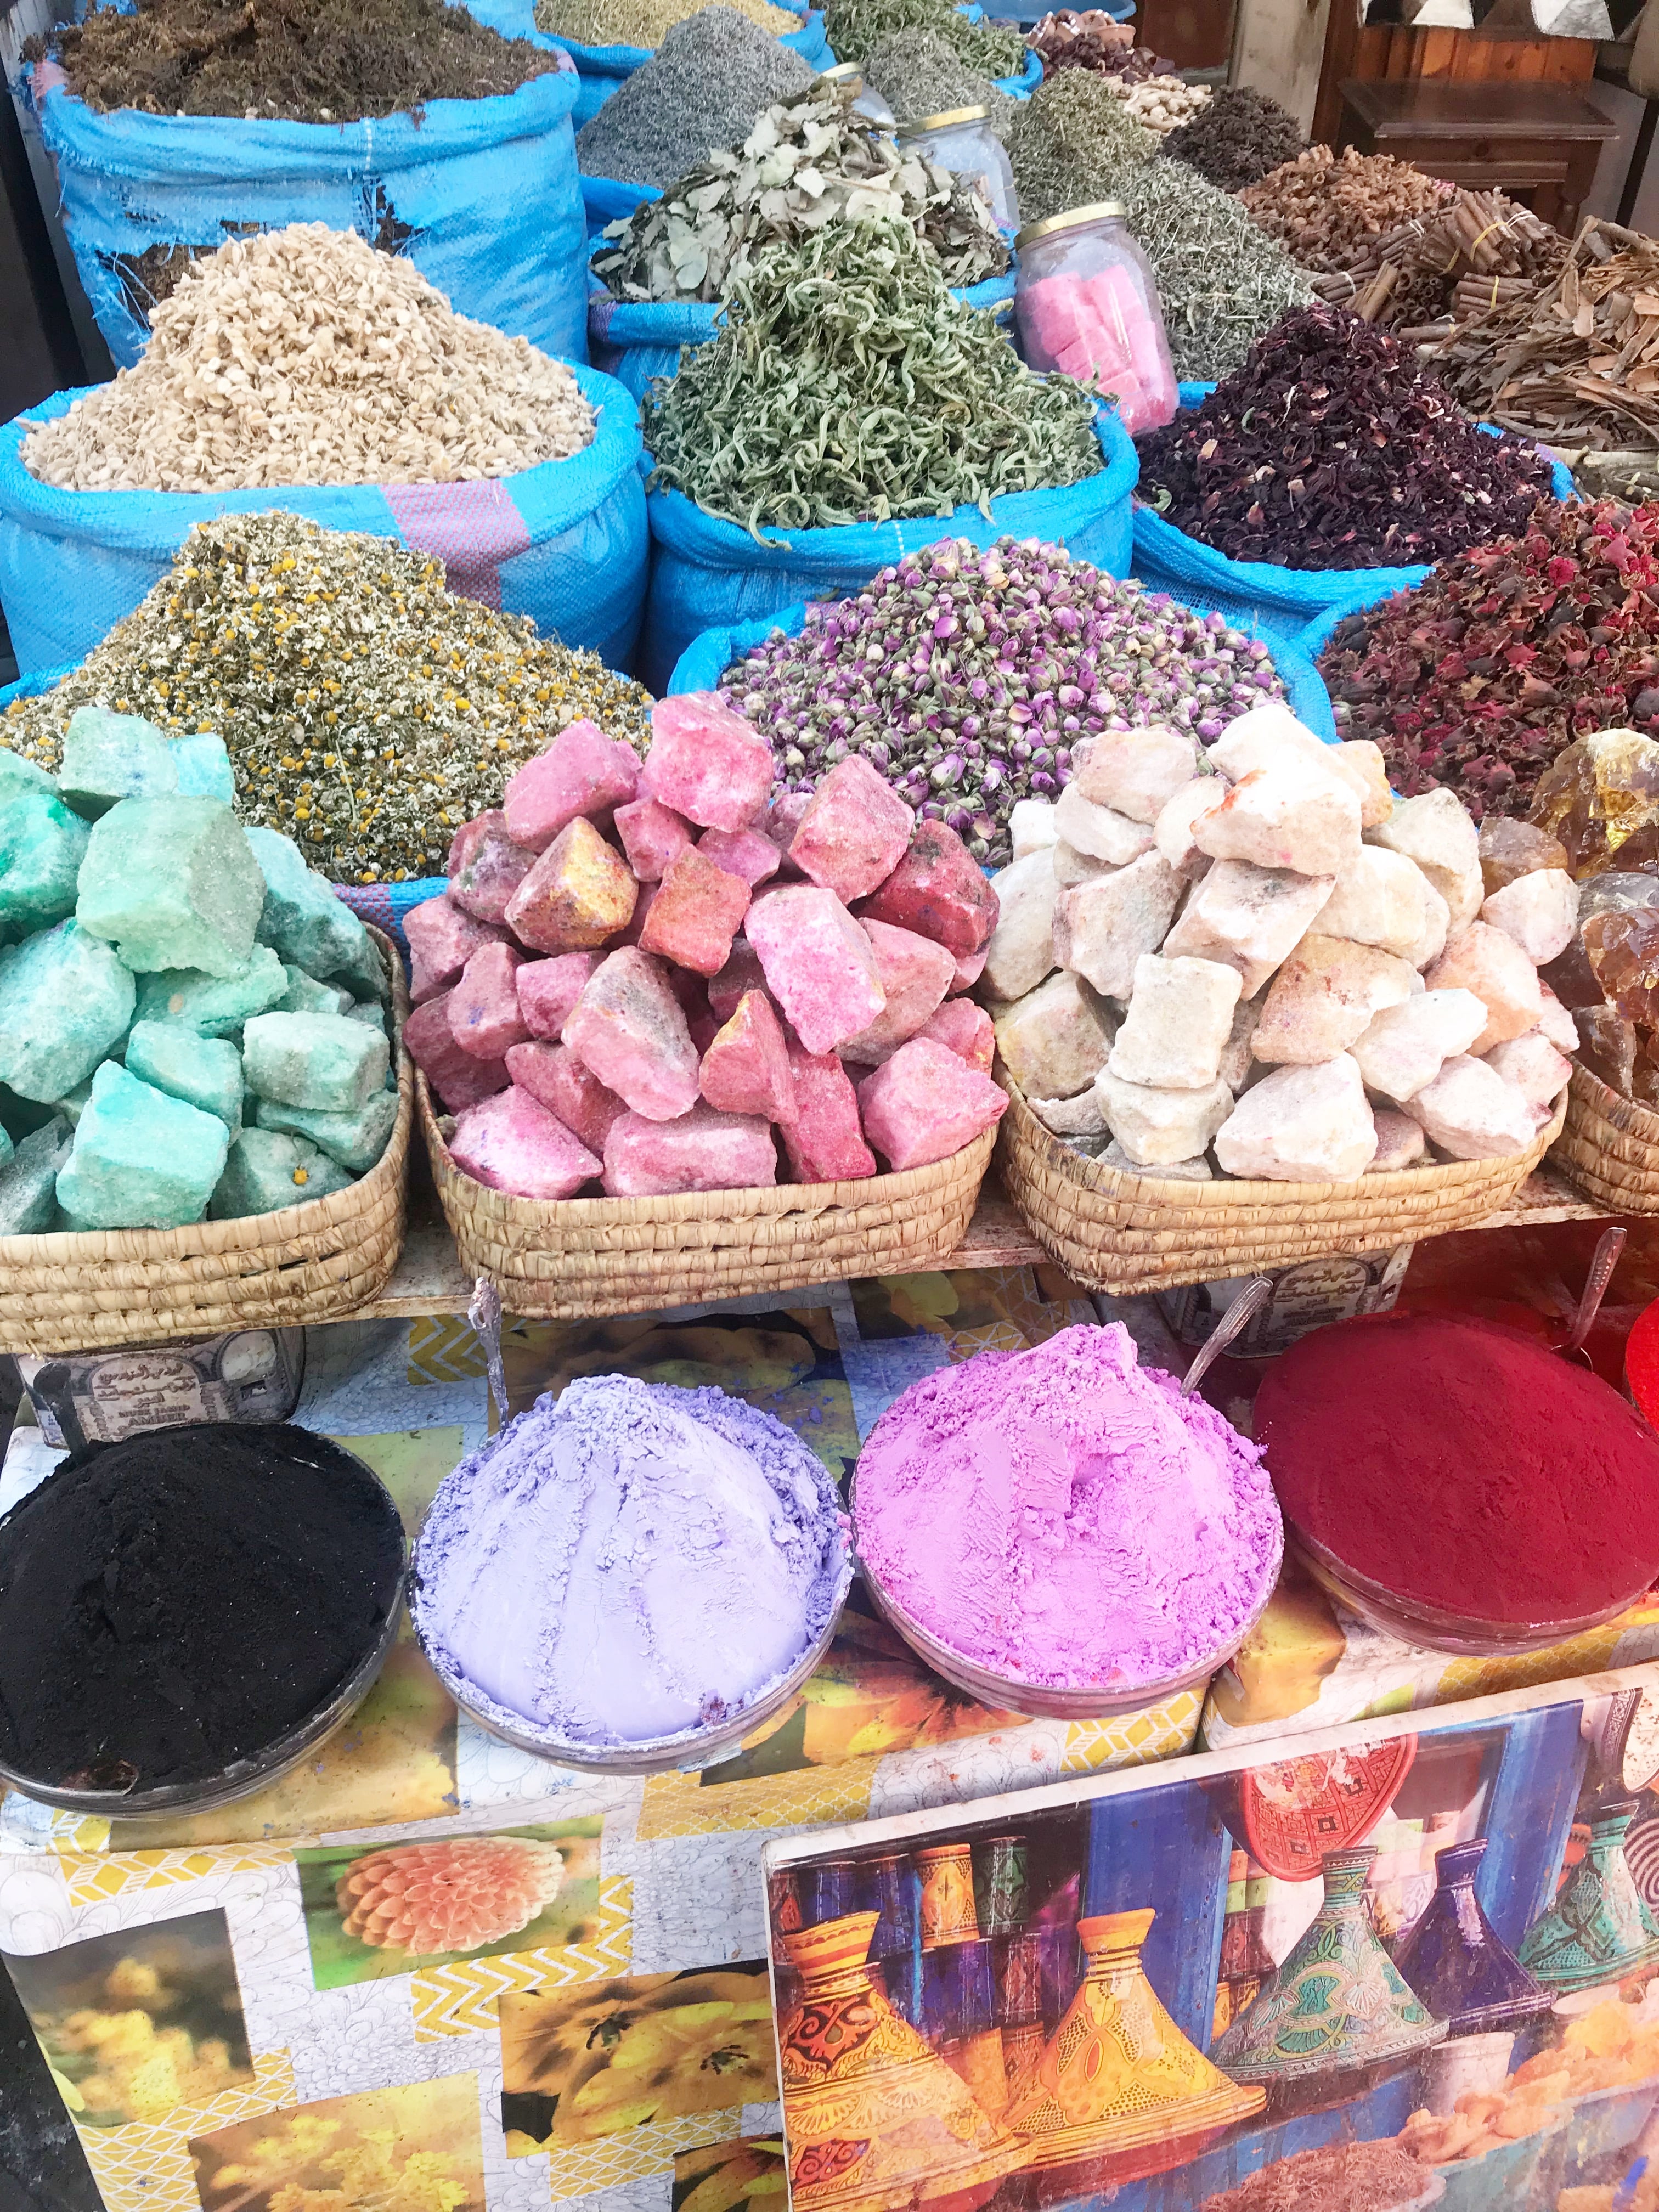 8 Things To Know Before You Go To Morocco - Traveling To Morocco - Planning A Trip To Morocco - Morocco Travel Tips - Tips For Morocco - Morocco Travel - Marrakech Travel - Fes Travel - Travel Blog Morocco - #Morocco #travelblog